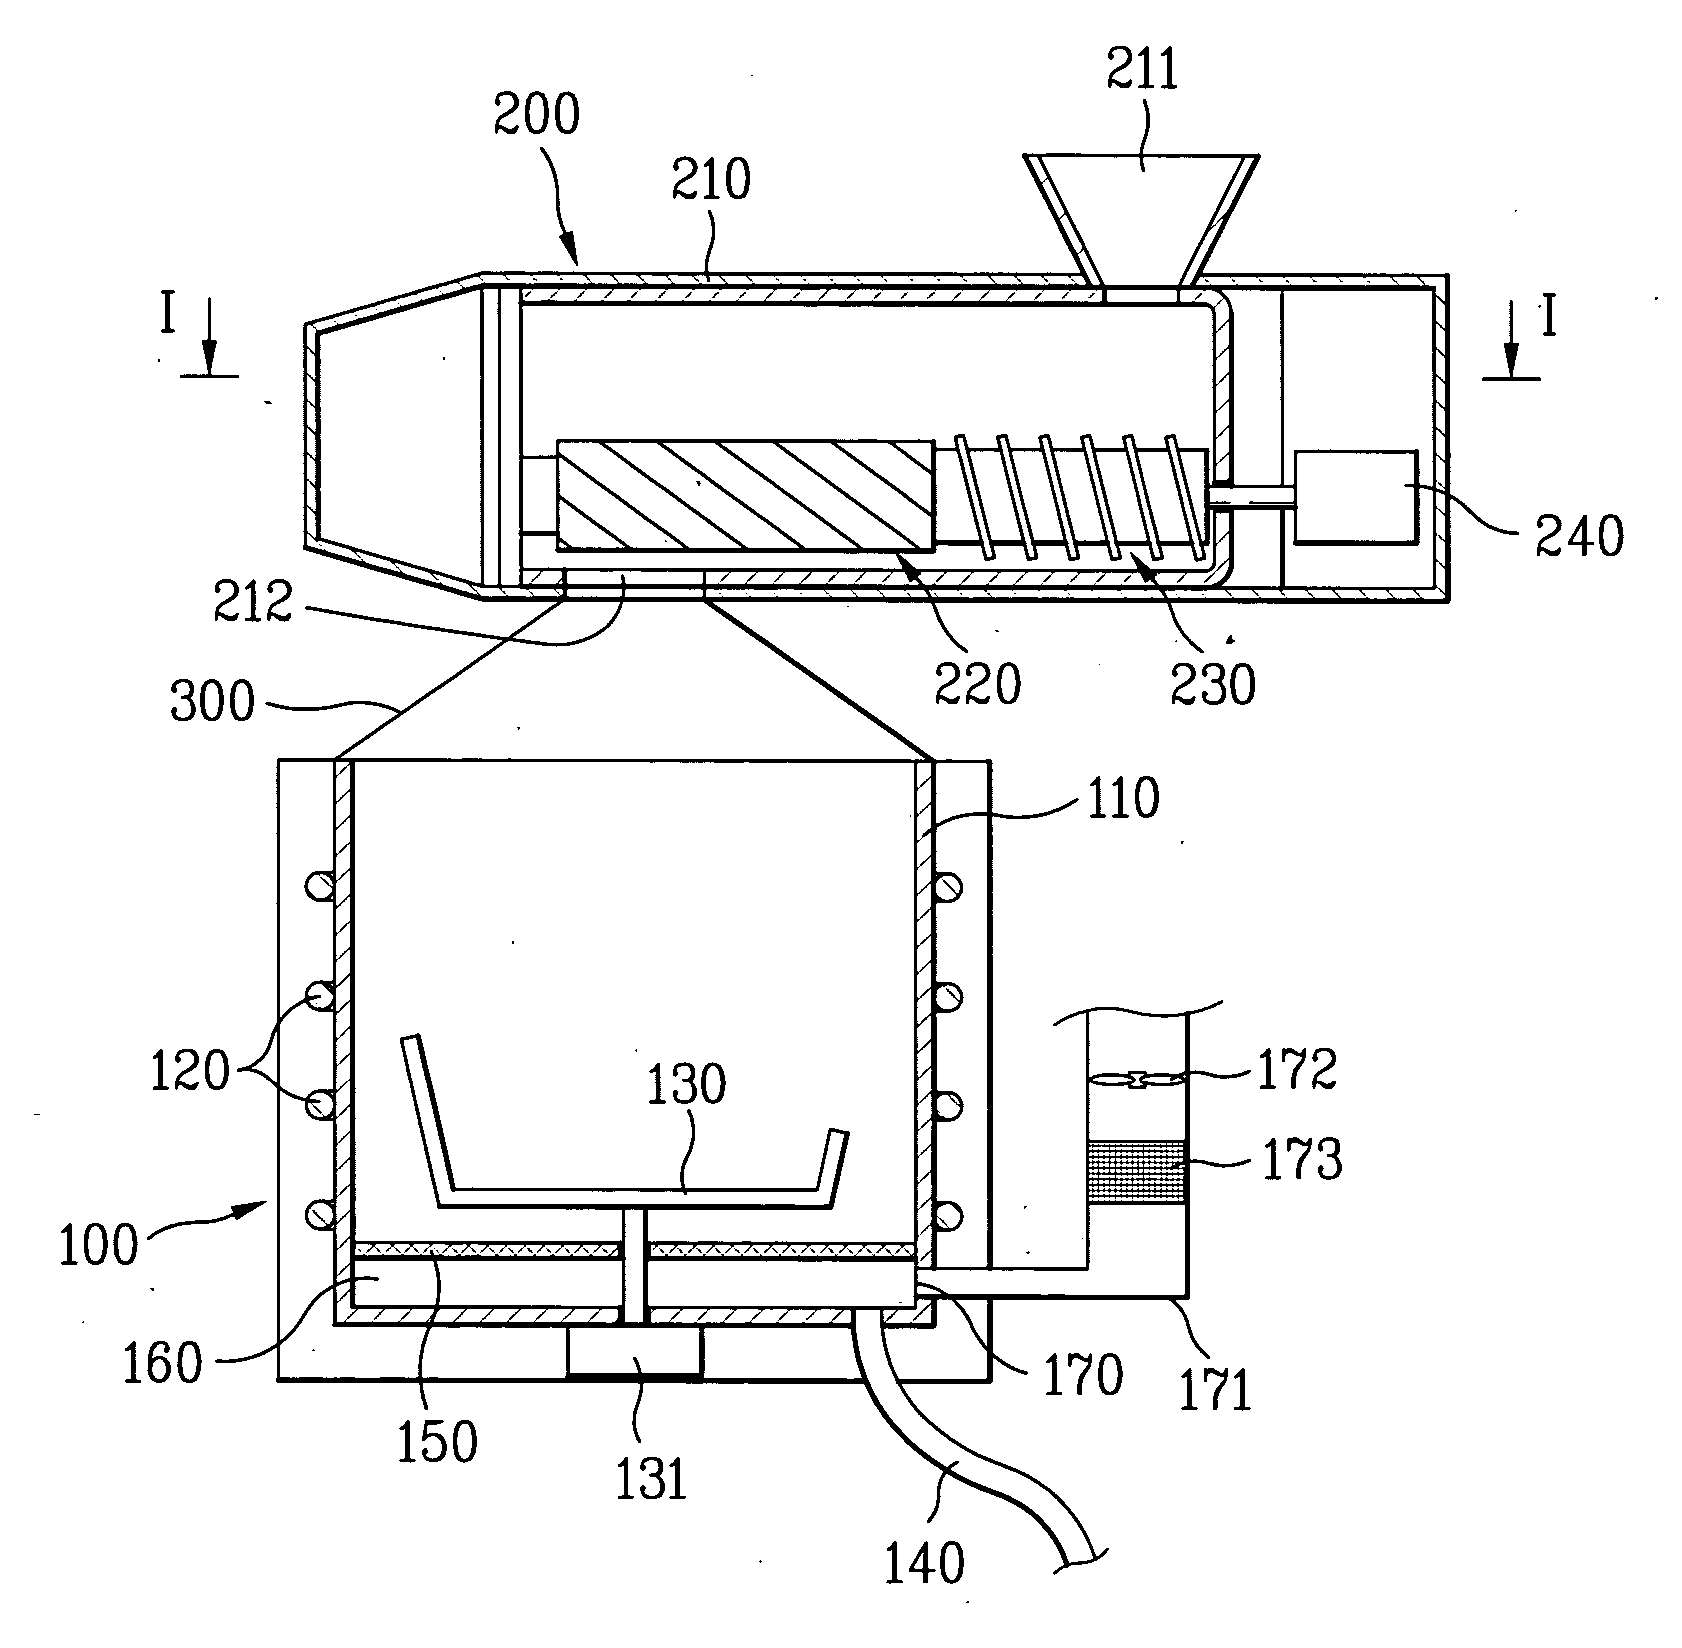 Apparatus for processing organic substances